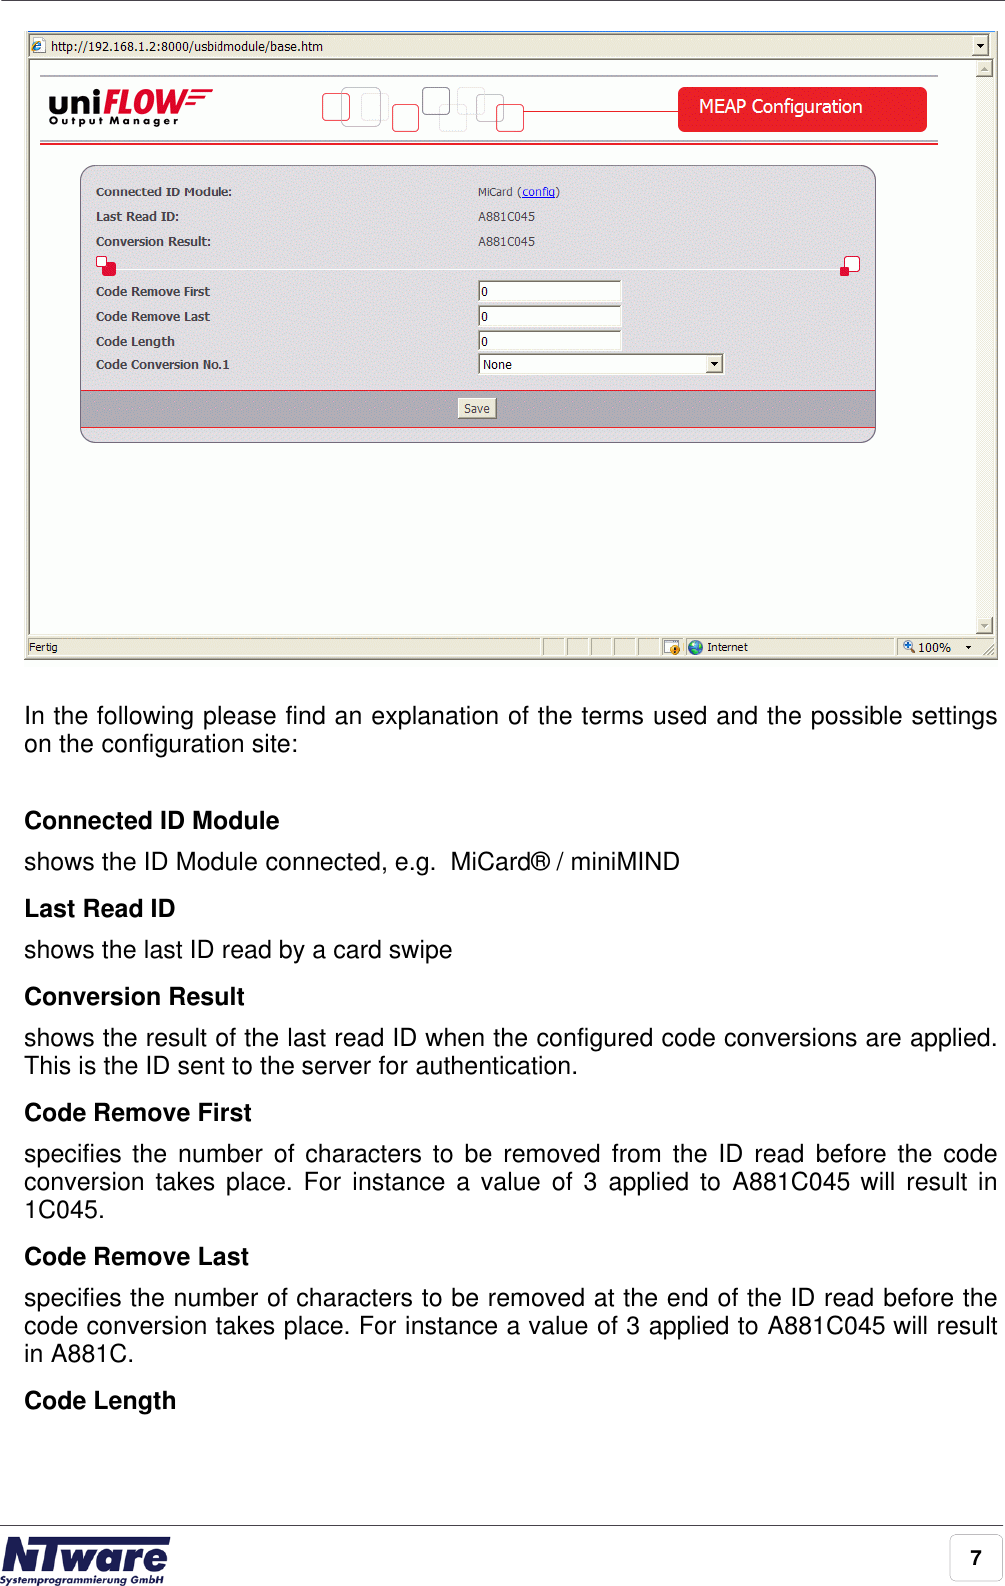 7In the following please find an explanation of the terms used and the possible settingson the configuration site: Connected ID Module shows the ID Module connected, e.g.  MiCard® / miniMINDLast Read ID shows the last ID read by a card swipeConversion Resultshows the result of the last read ID when the configured code conversions are applied.This is the ID sent to the server for authentication.Code Remove Firstspecifies the number of characters  to  be  removed  from  the ID  read  before  the  codeconversion takes place.  For  instance a value  of  3  applied to  A881C045 will  result in1C045.Code Remove Lastspecifies the number of characters to be removed at the end of the ID read before thecode conversion takes place. For instance a value of 3 applied to A881C045 will resultin A881C.Code Length